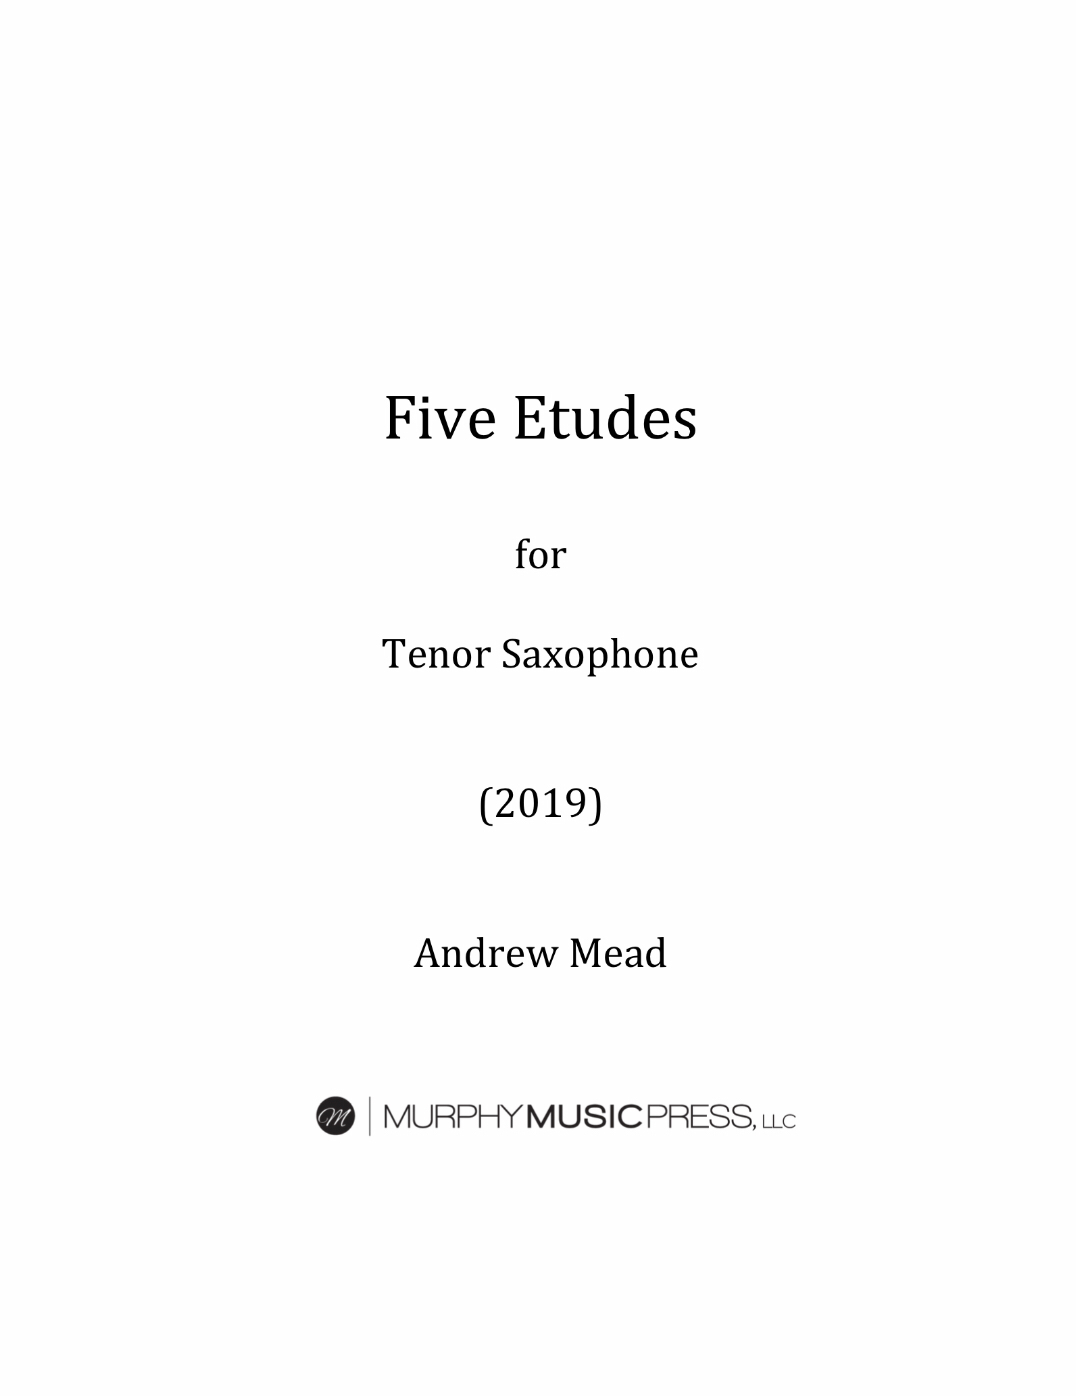 Five Concert Etudes For Tenor Saxophone by Andrew Mead